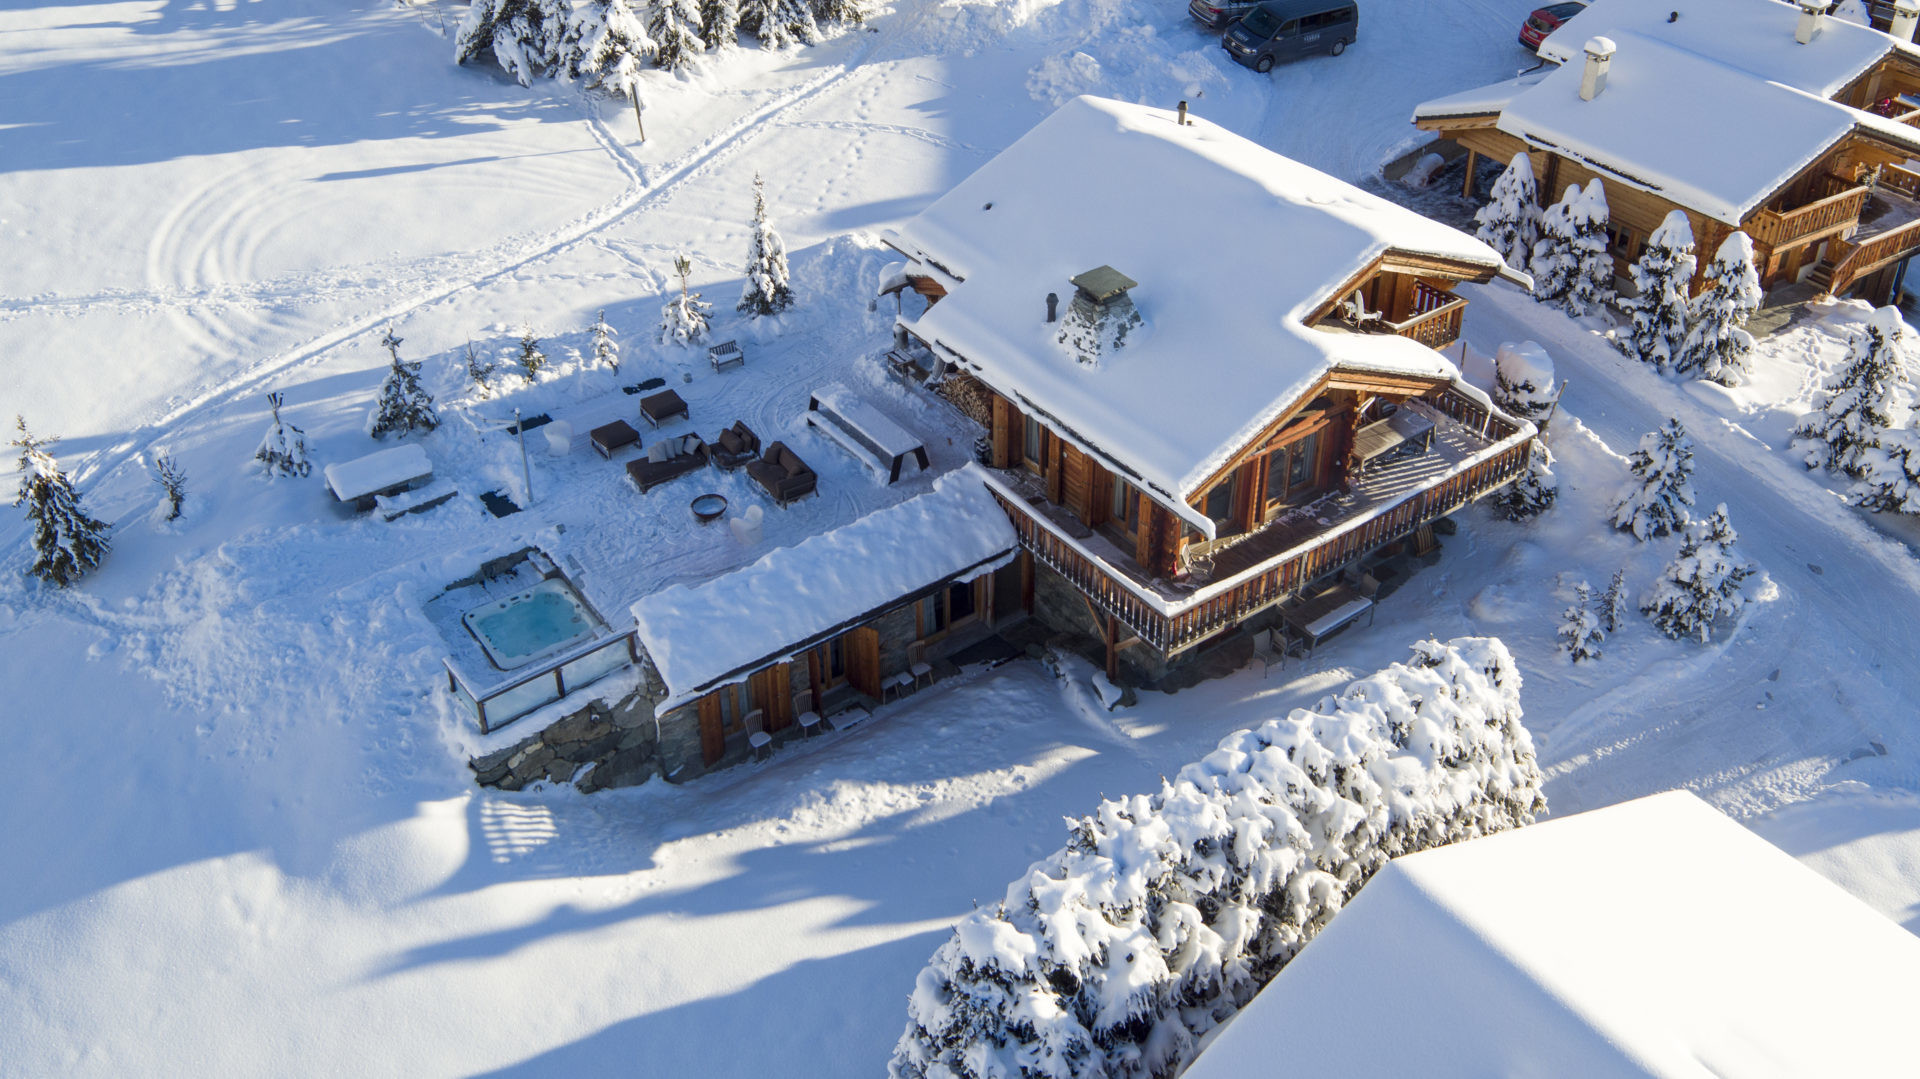 Verbier Location Chalet Luxe Vicanite Chalet